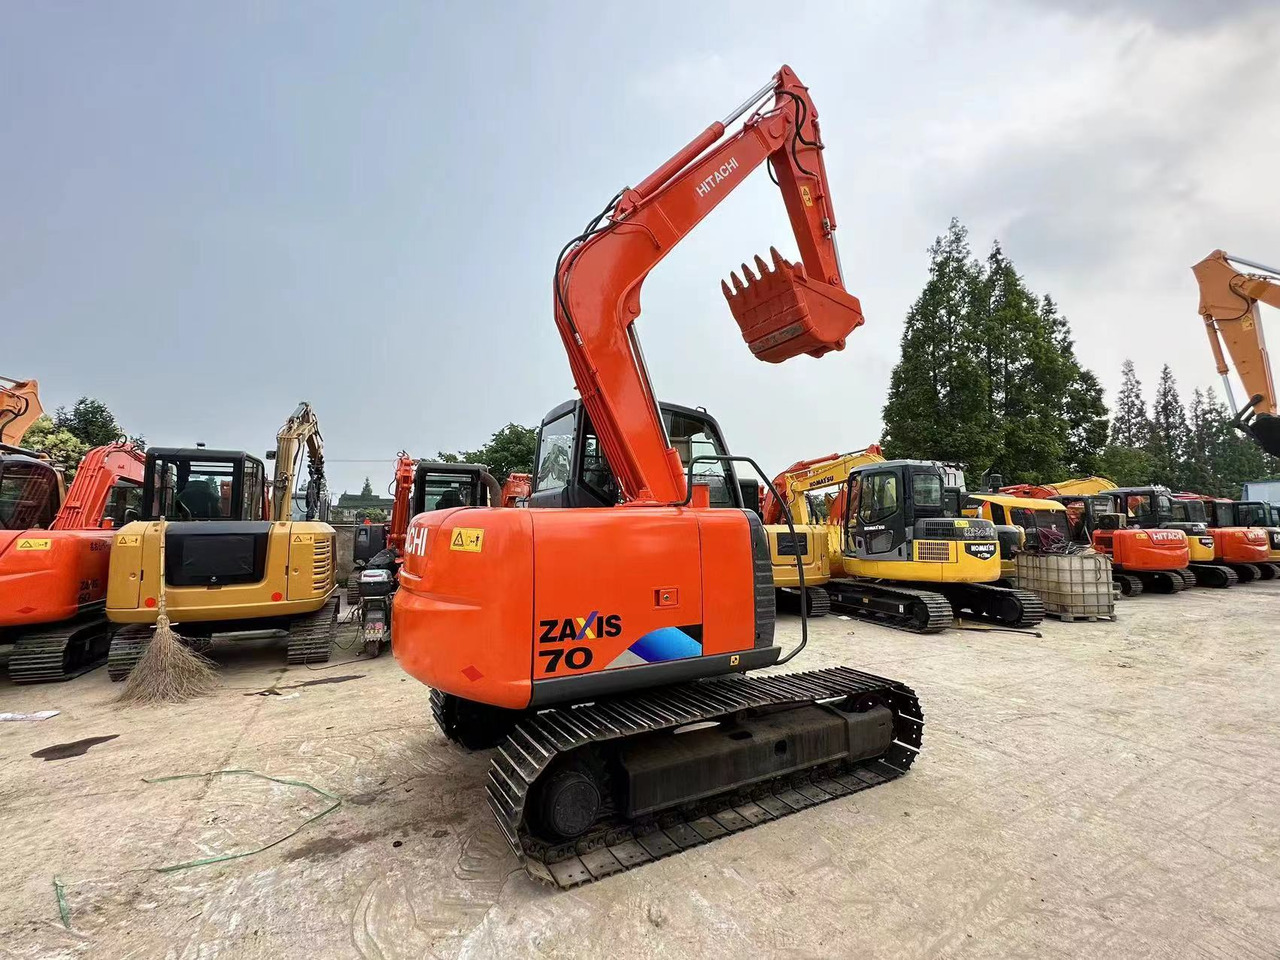 Máy xúc bánh xích 7 ton used excavator good condition Hitachi ZX70 Strong power with low working hours good working condition welcome to inquire: hình 2